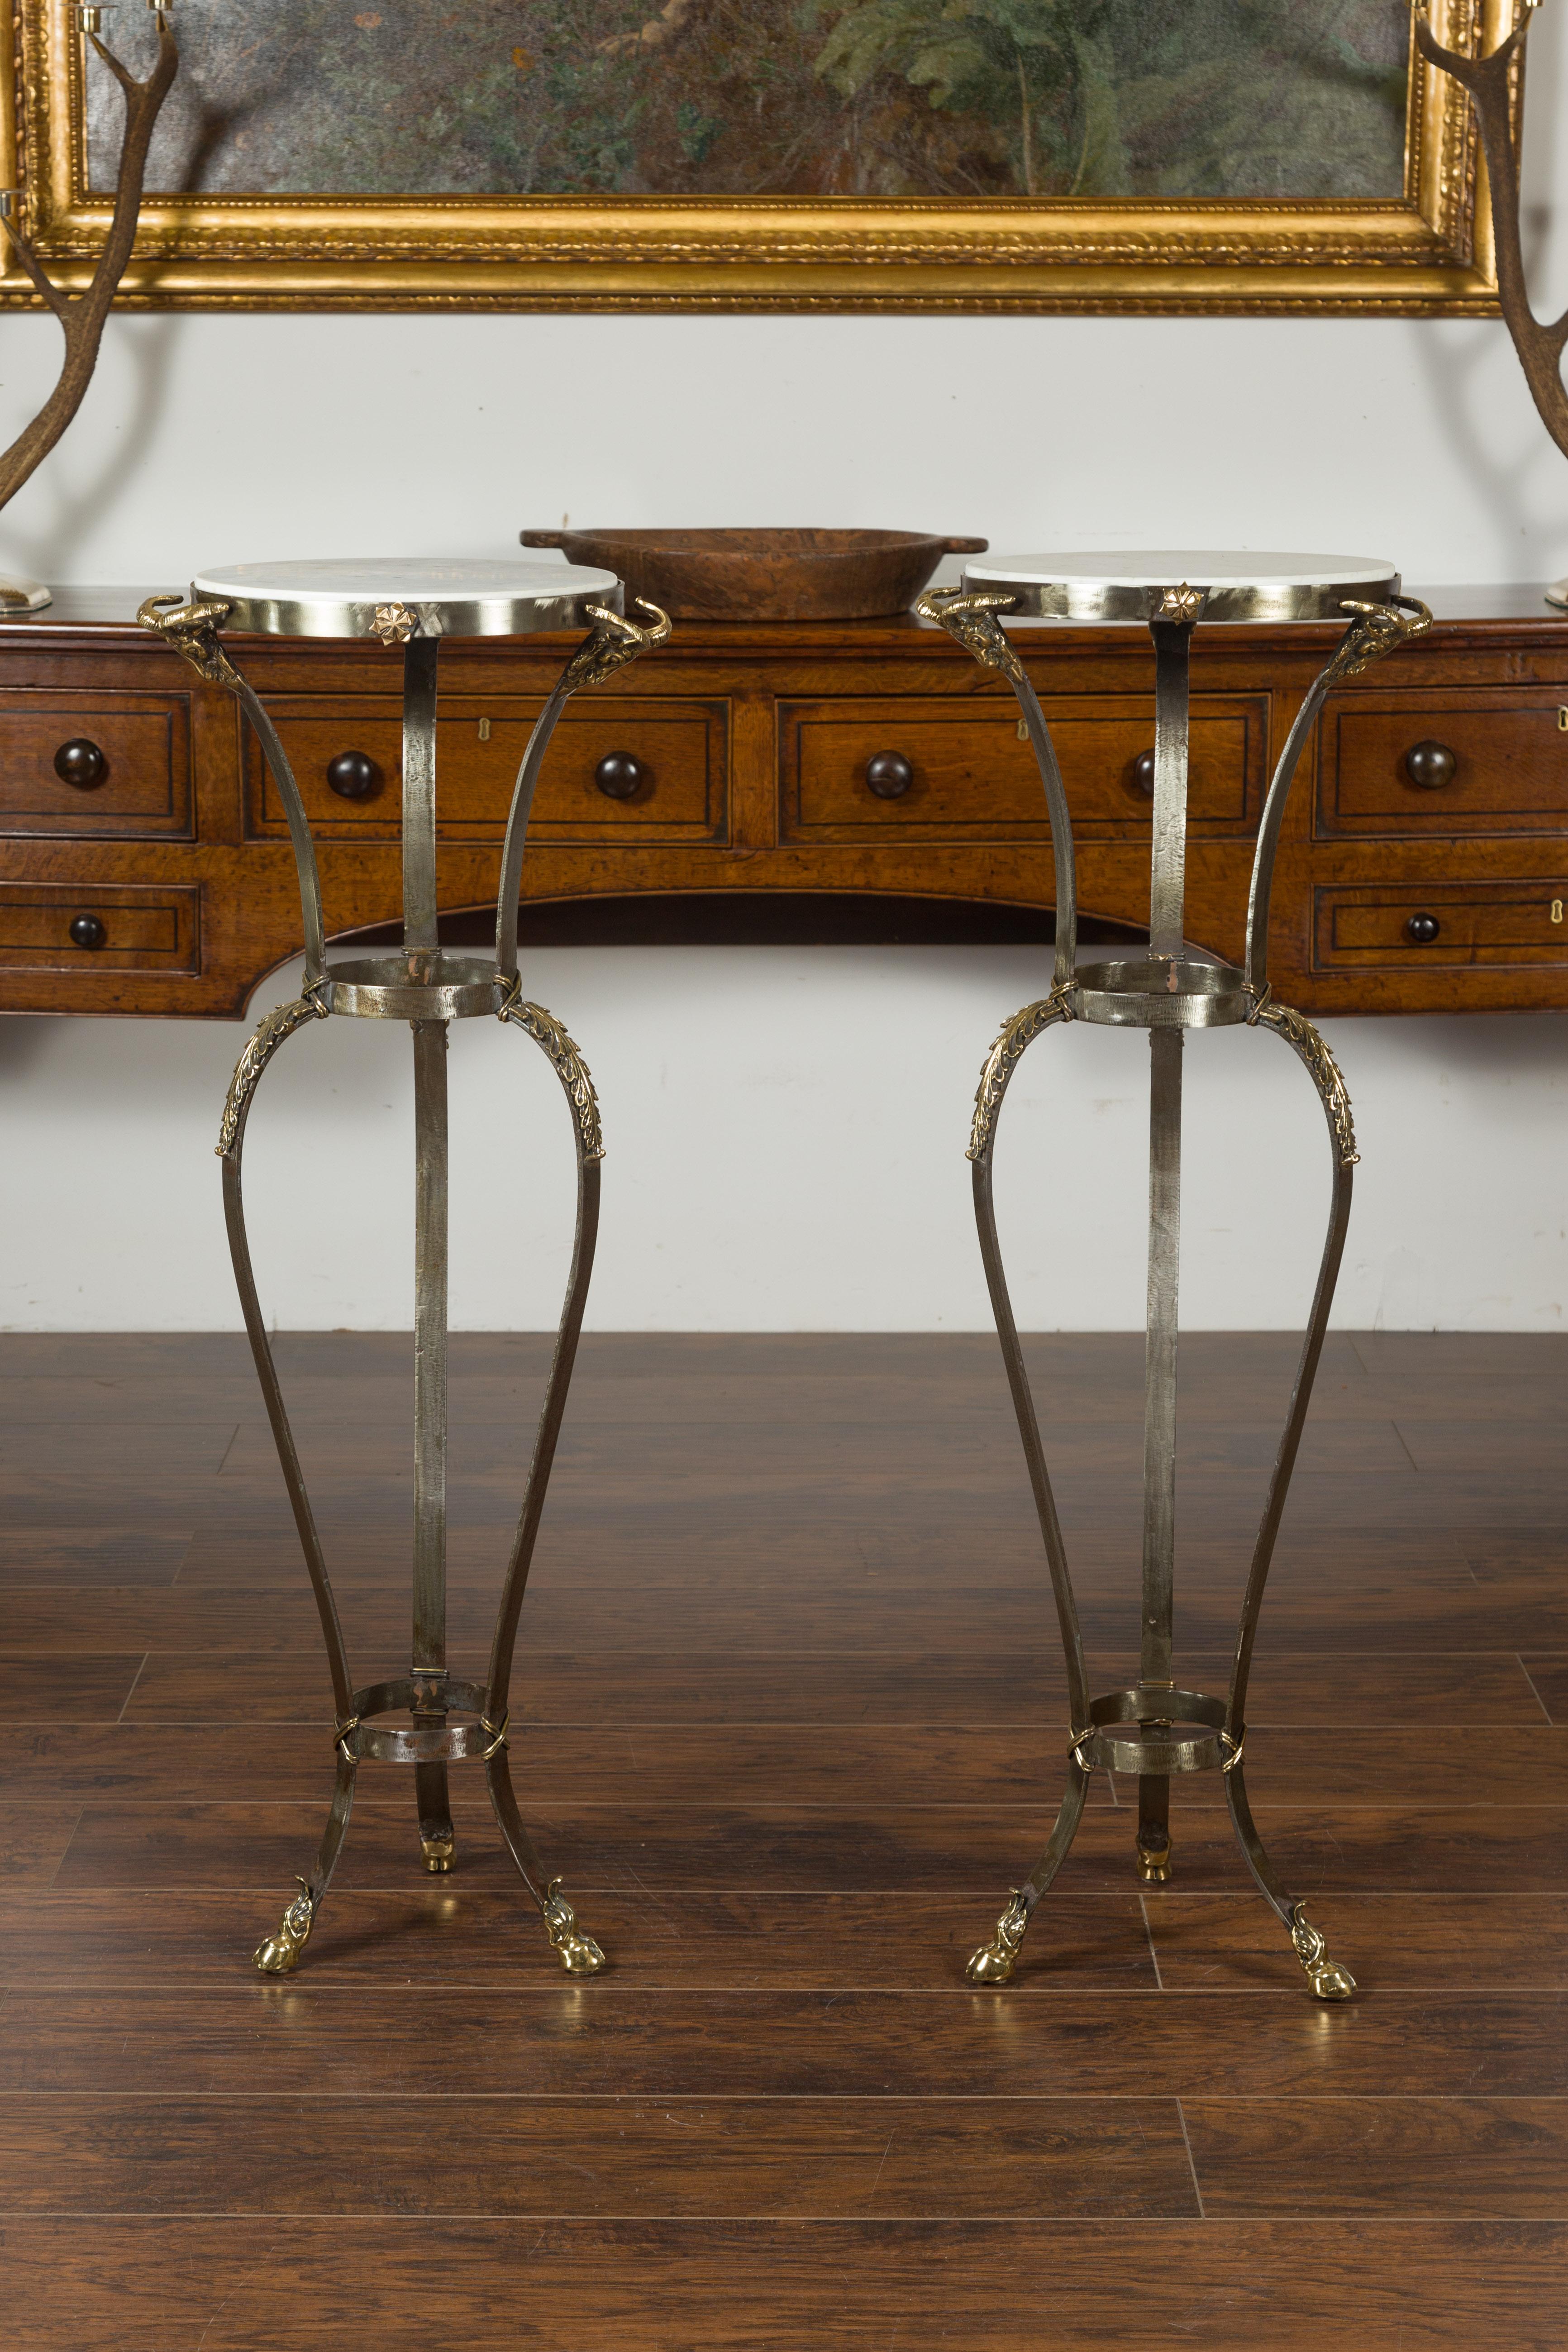 A vintage pair of Italian steel and brass pedestals from the mid-20th century with marble tops, ram's heads and hoofed feet. Born in Italy during the midcentury period, each of this pair of Italian tall pedestals features a white veined circular top